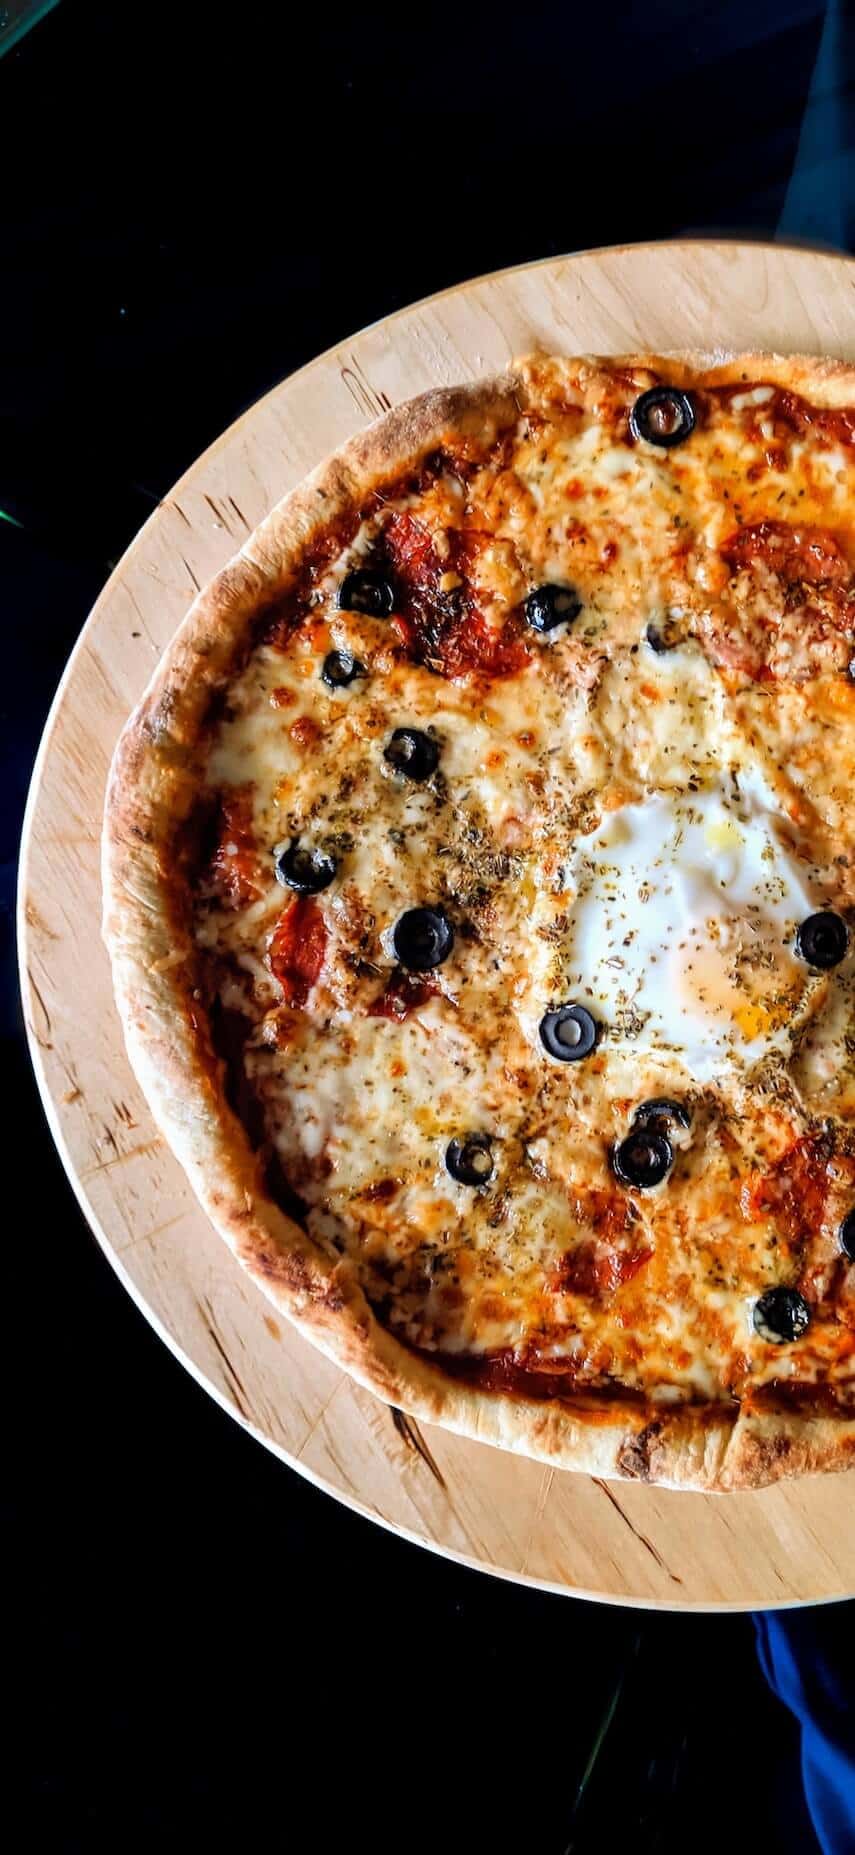 Top down shot of a pizza with cheese and olives on a circular wooden board on a black table